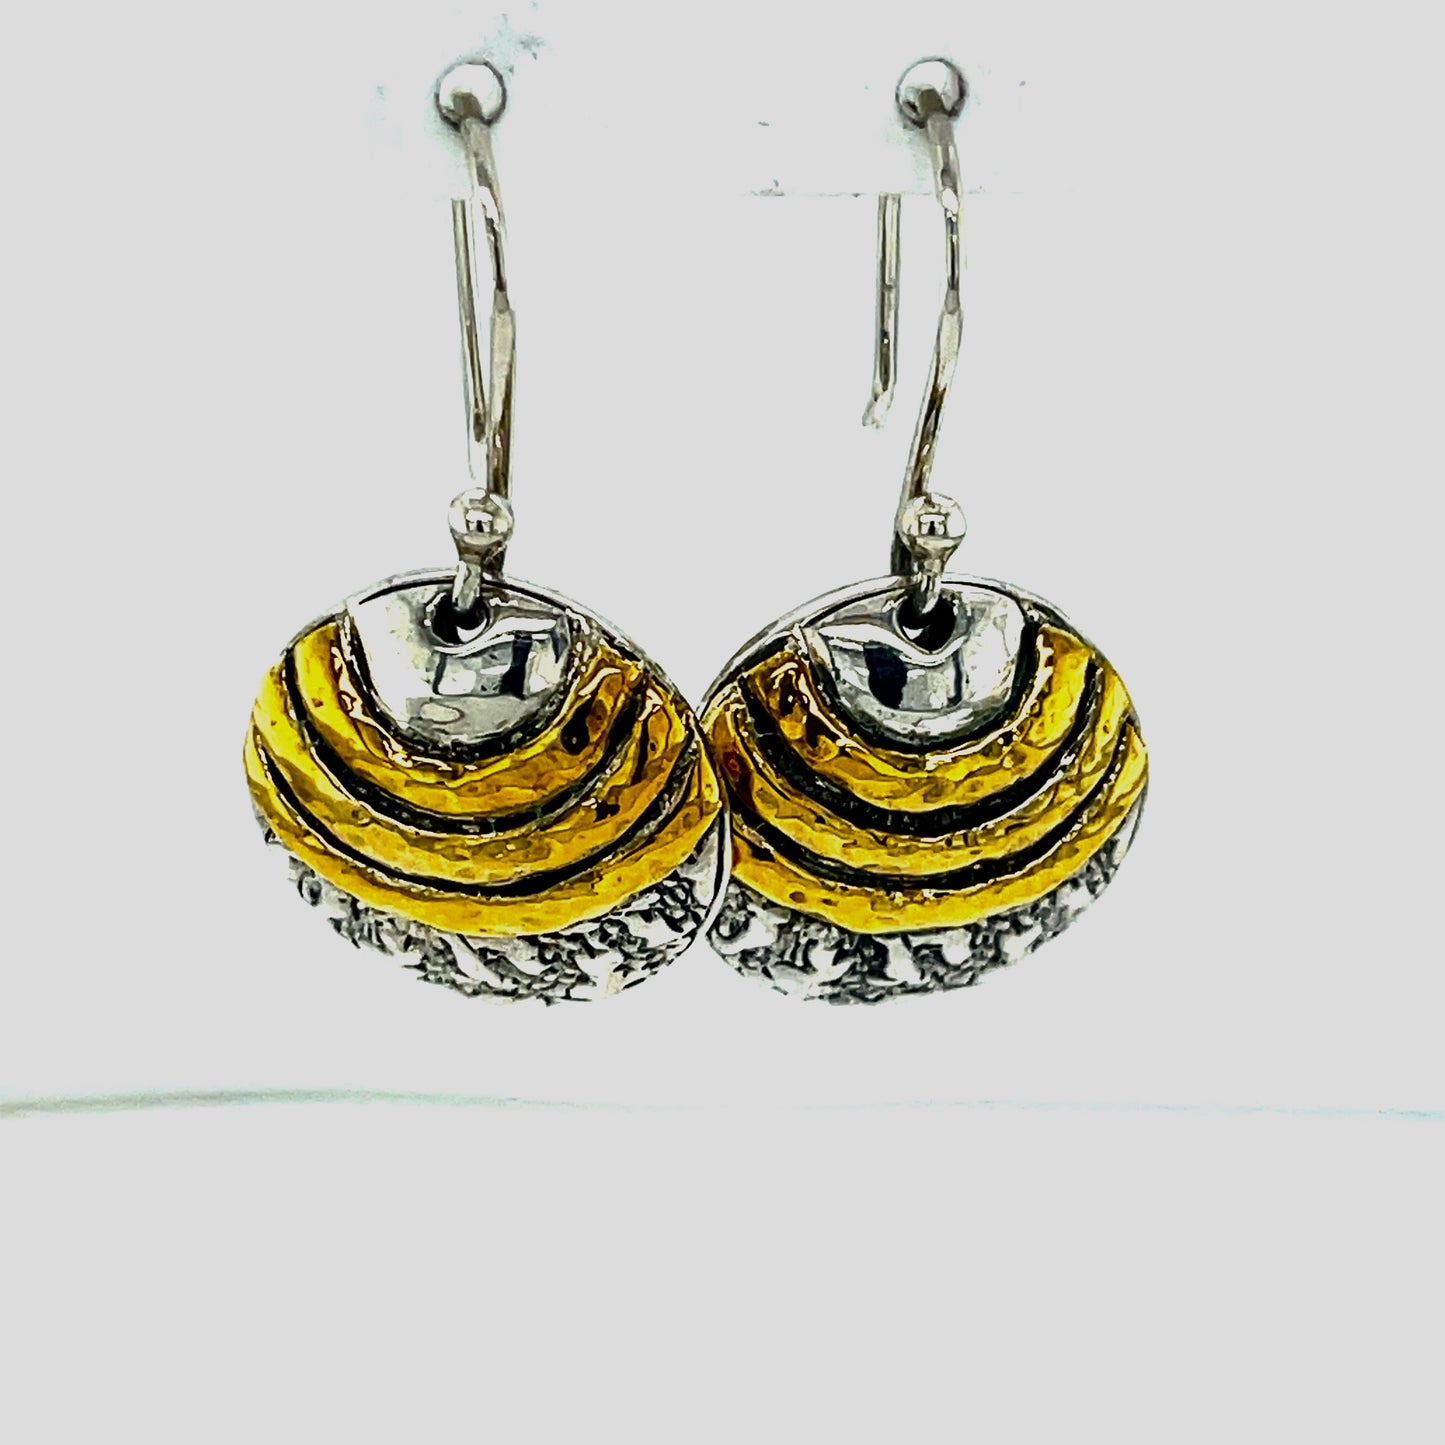 Silver earrings with 18kt Gold accent